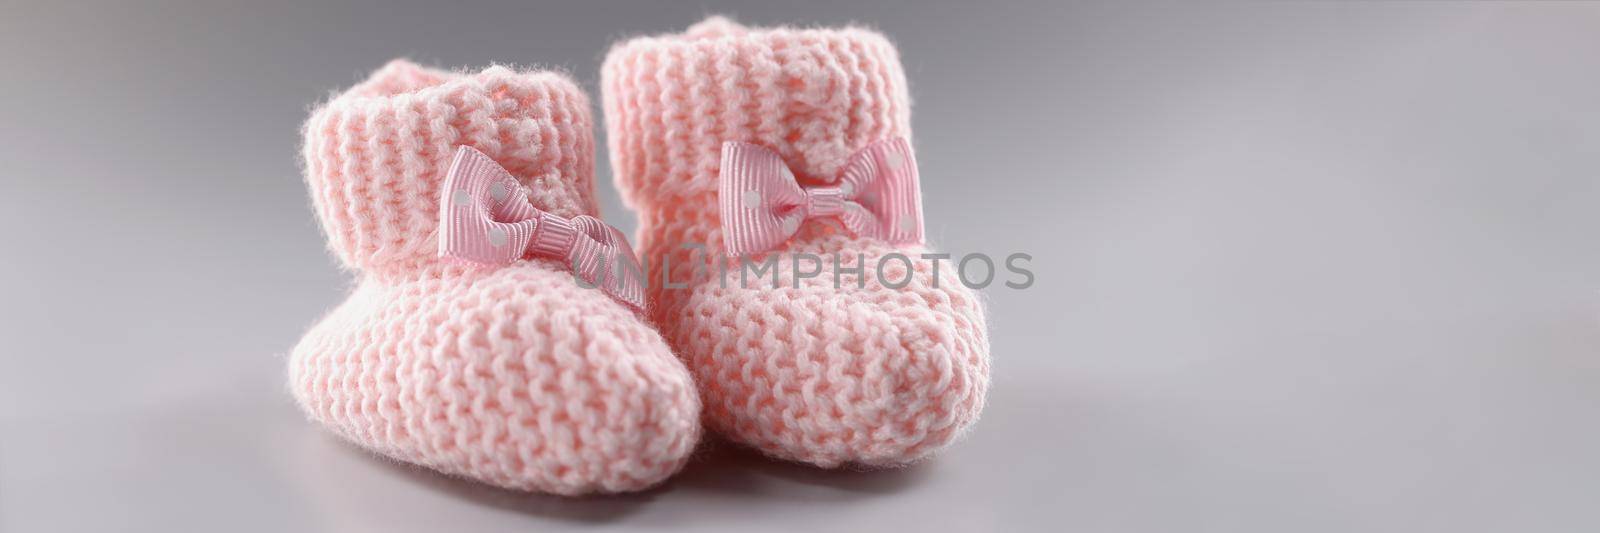 Close-up of pair of knitted pink baby booties with cute bow on it. Handicraft shoes for newborn baby on grey surface. Handmade, crochet, wool, care concept